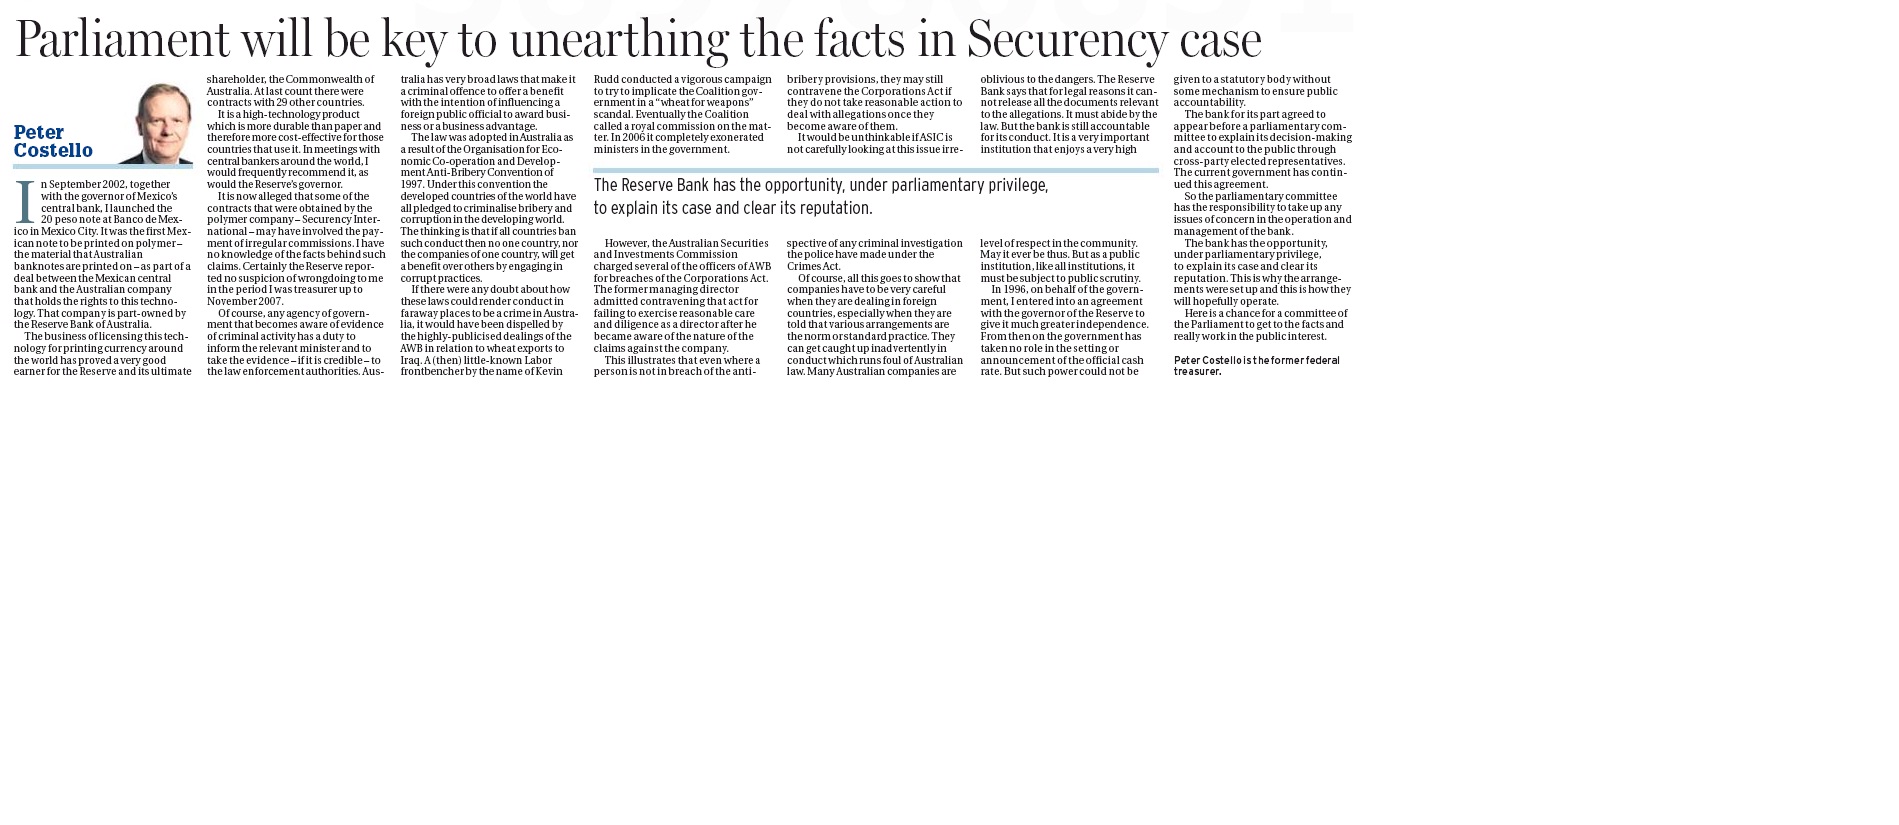 smh_-_parliament_will_be_key_to_unearthing_the_facts_in_securency_case_-_23_august_2012jpg